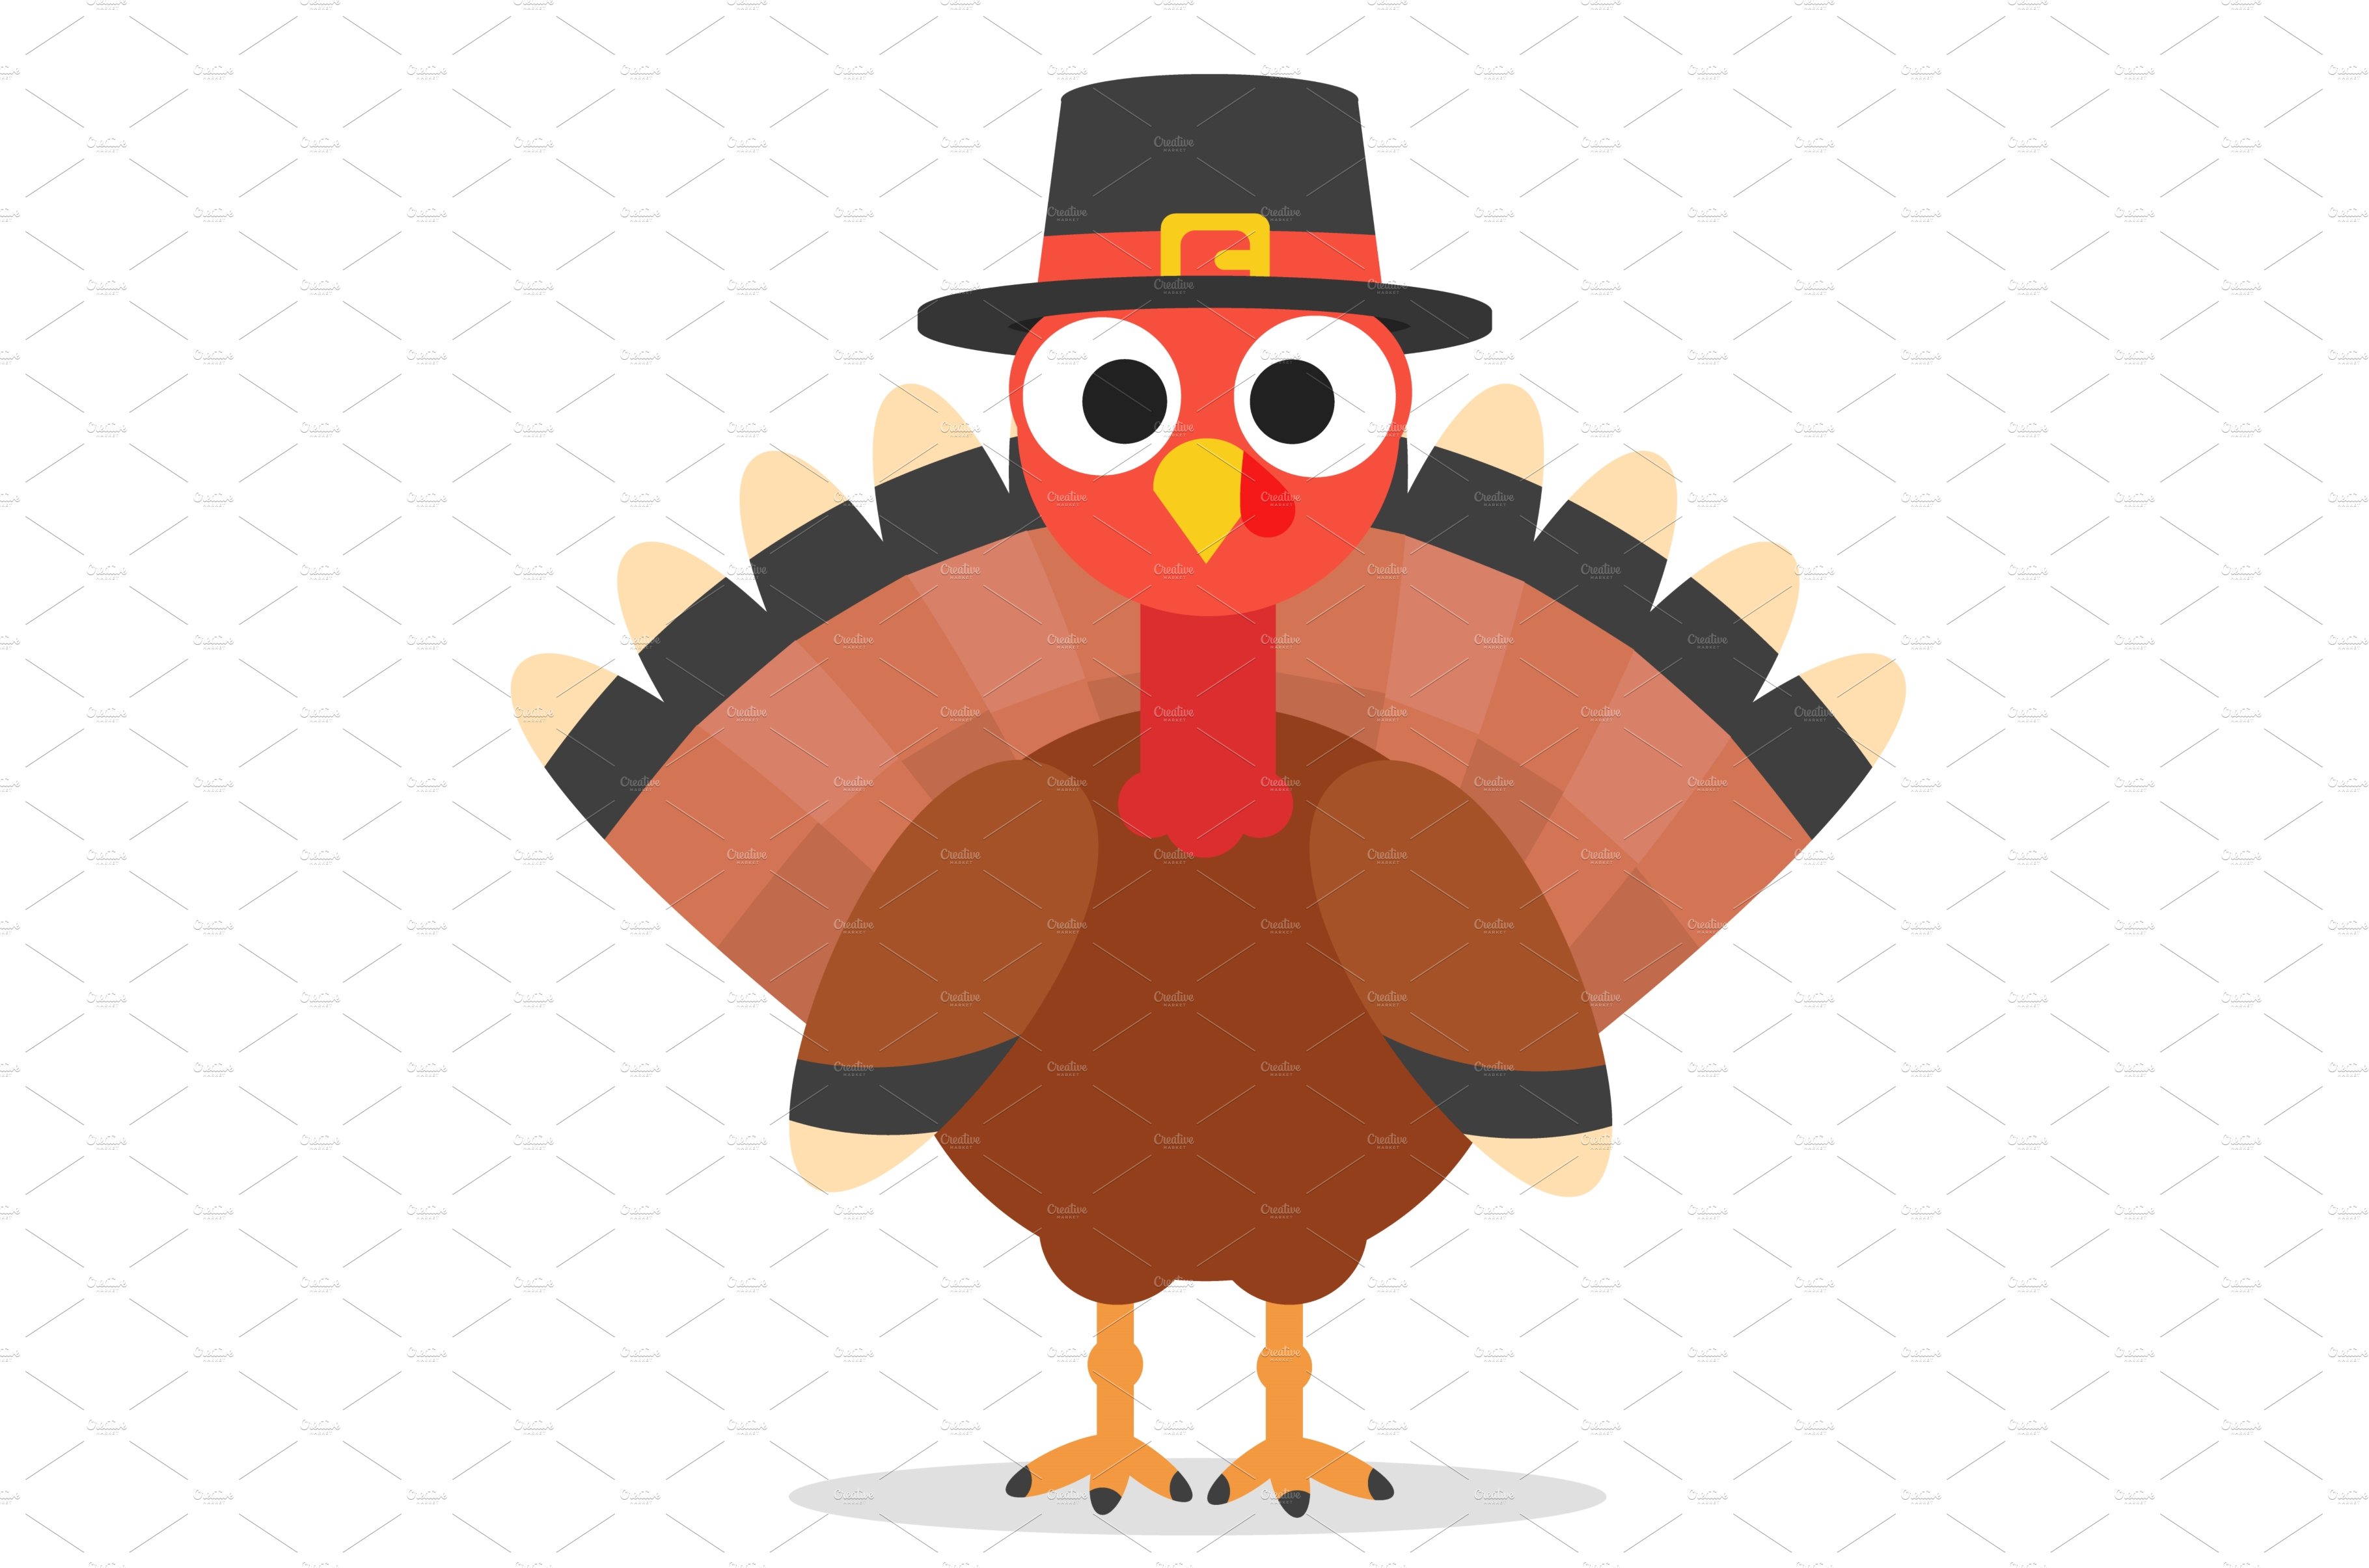 Turkey bird in a hat stands on a cover image.